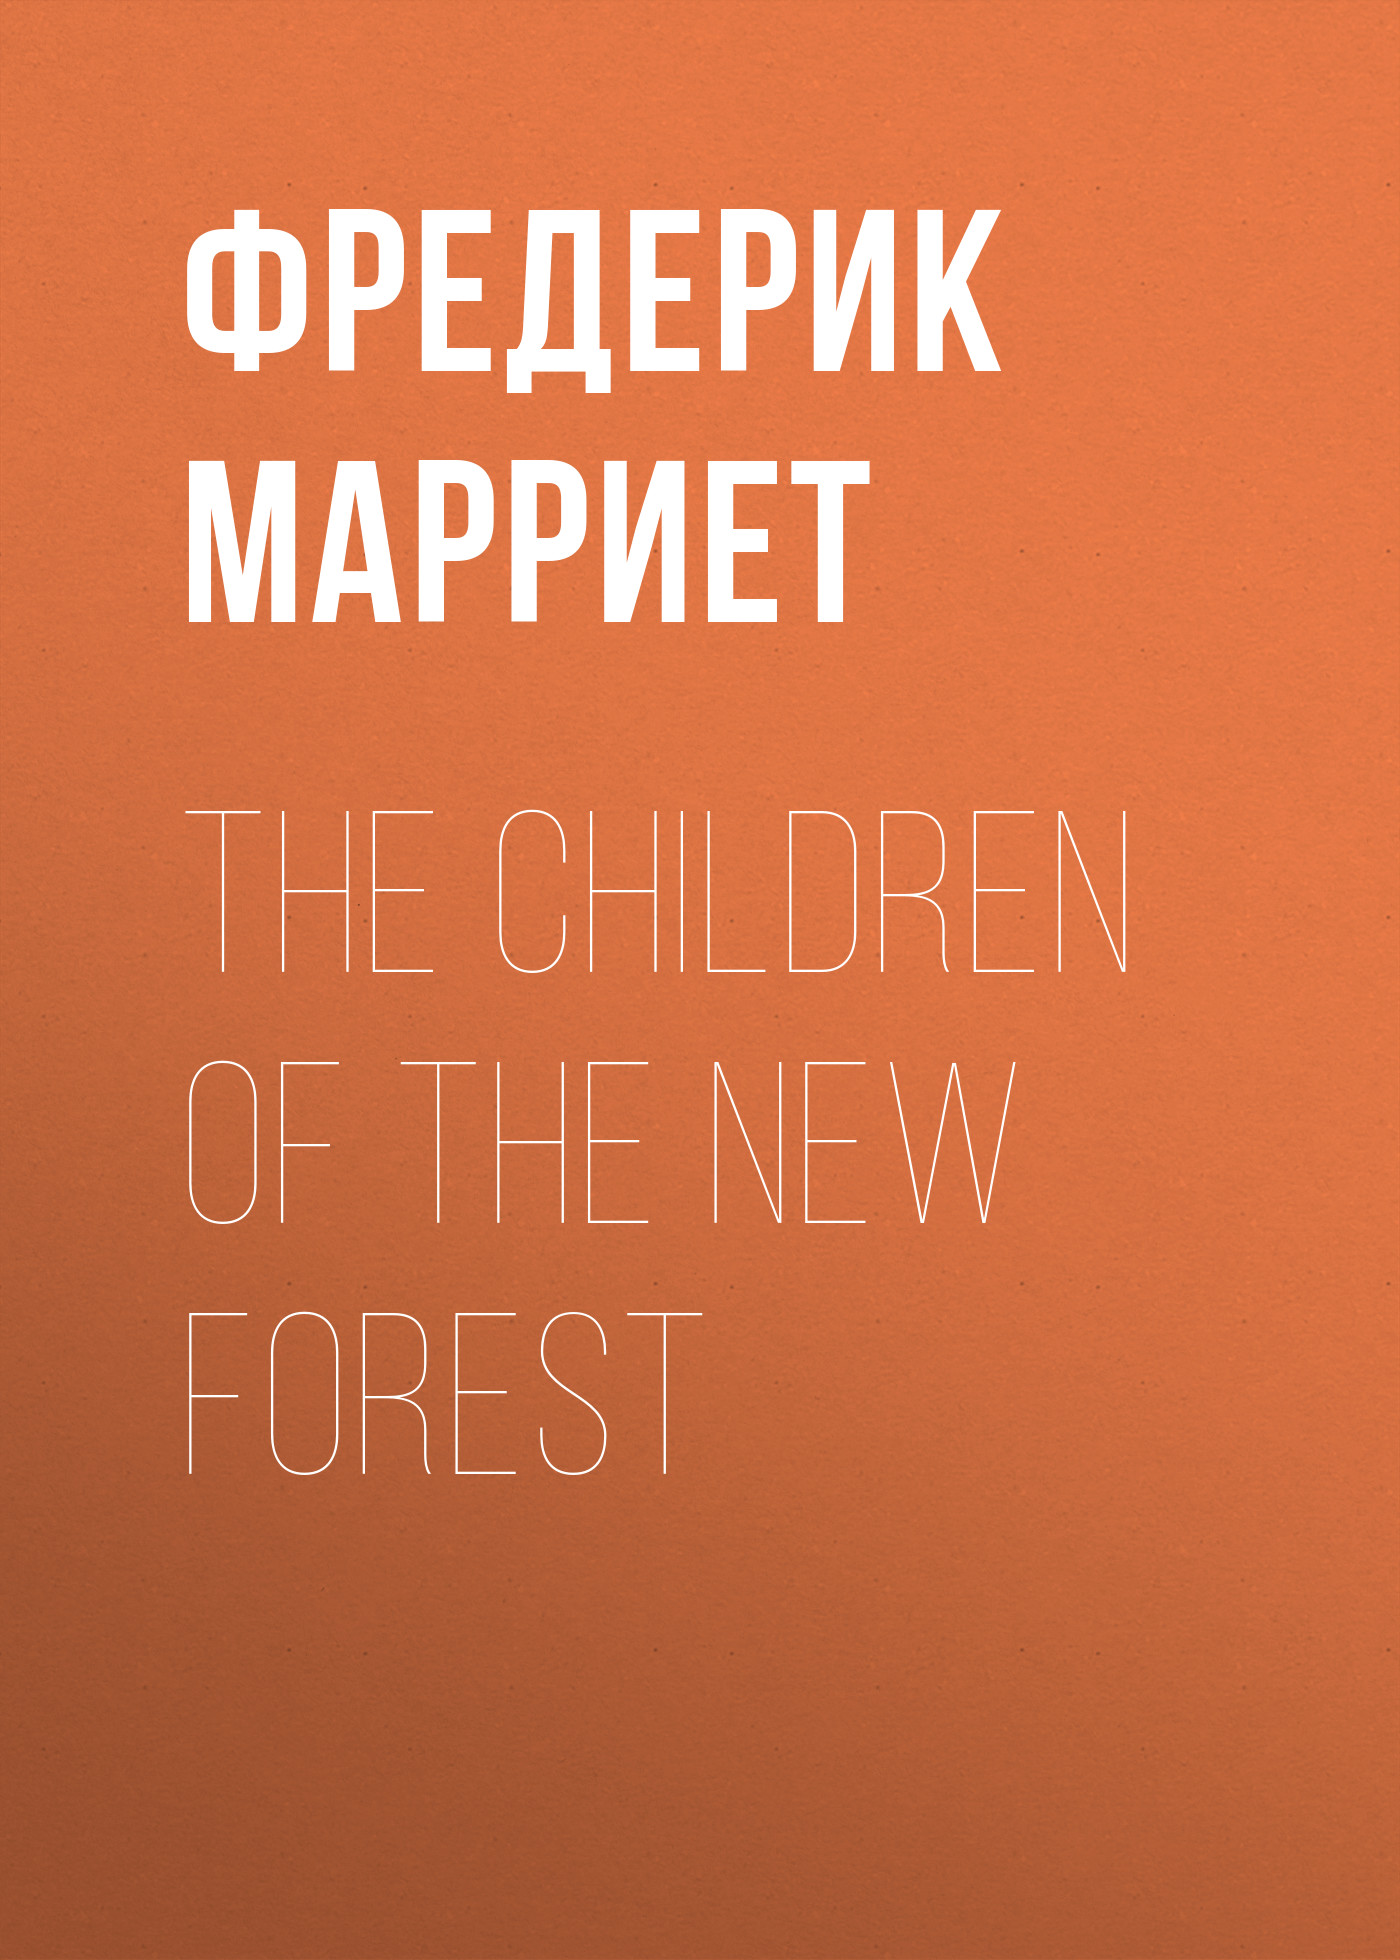 Фредерик Марриет The Children of the New Forest